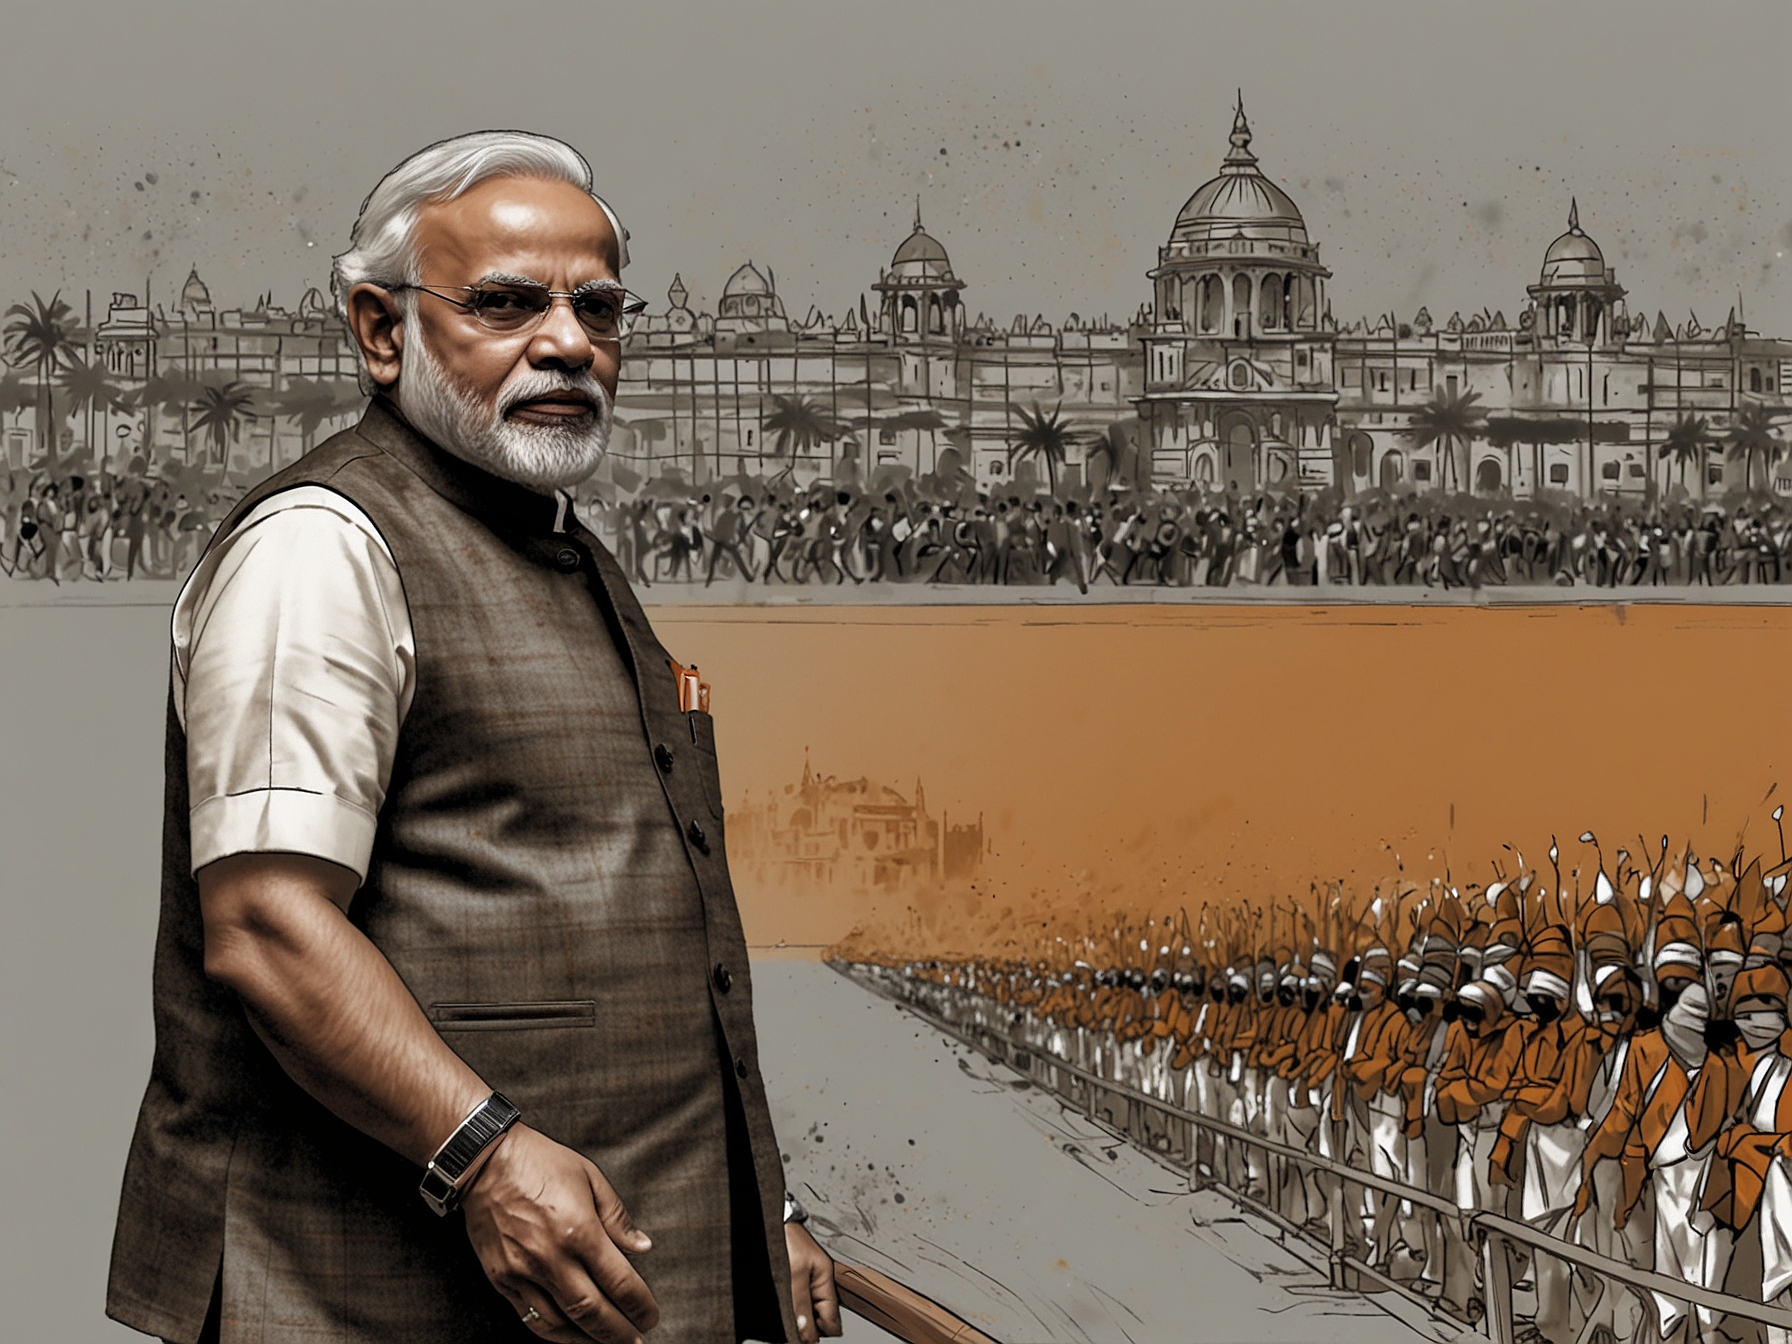 An illustration showing Prime Minister Narendra Modi facing political challenges, with the resurgence of SP and RJD symbolizing voters' shift towards social equity and justice.